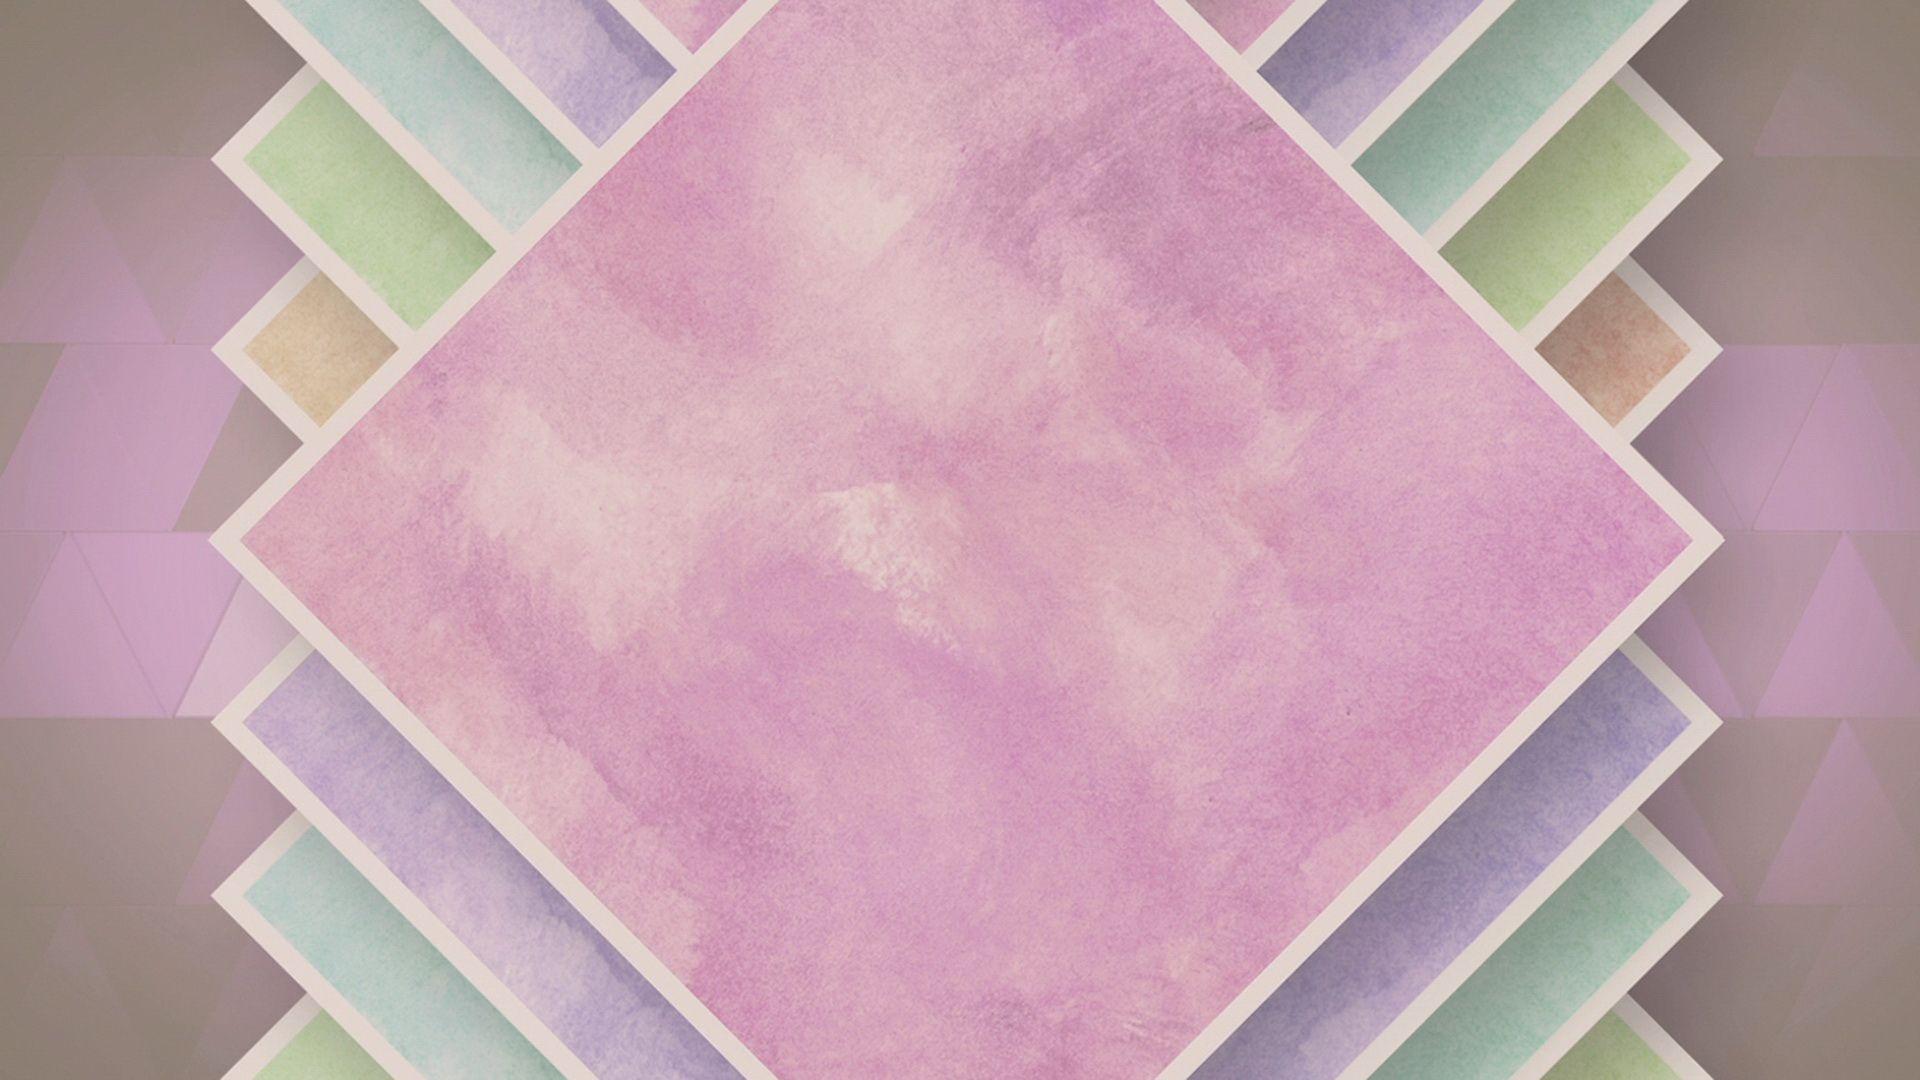 pastel wallpapers aesthetic pink paste pattern computer background backgrounds wallpaperaccess uncalke res 4kwallpaper wiki